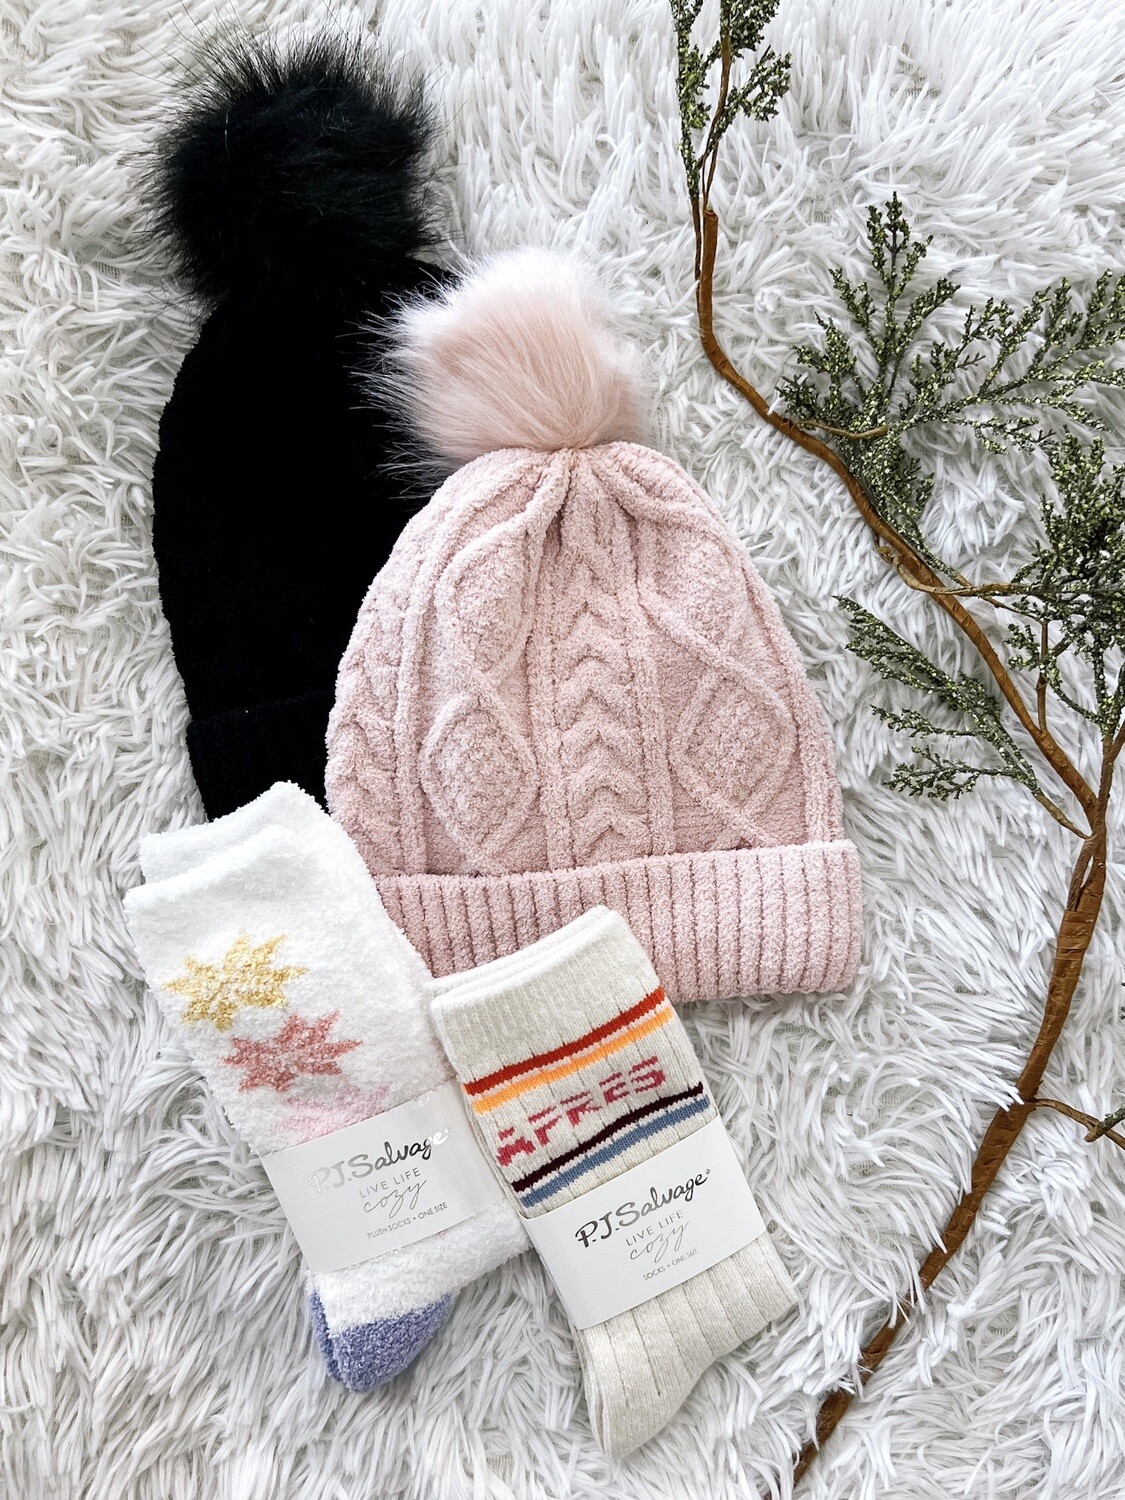 Pink Cable Knit Beanie